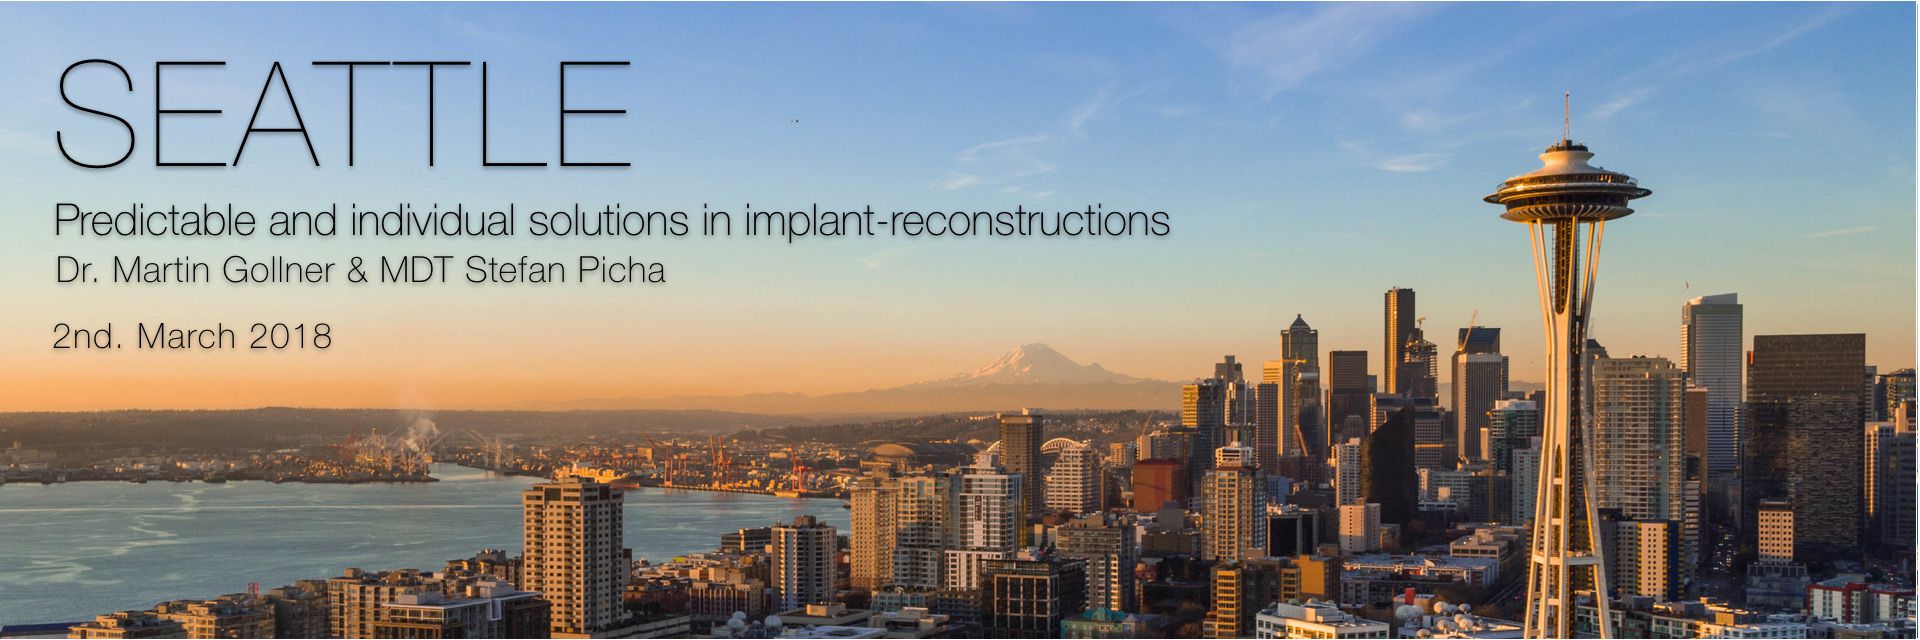 Predictable and individual solutions in implant-reconstructions - Seattle